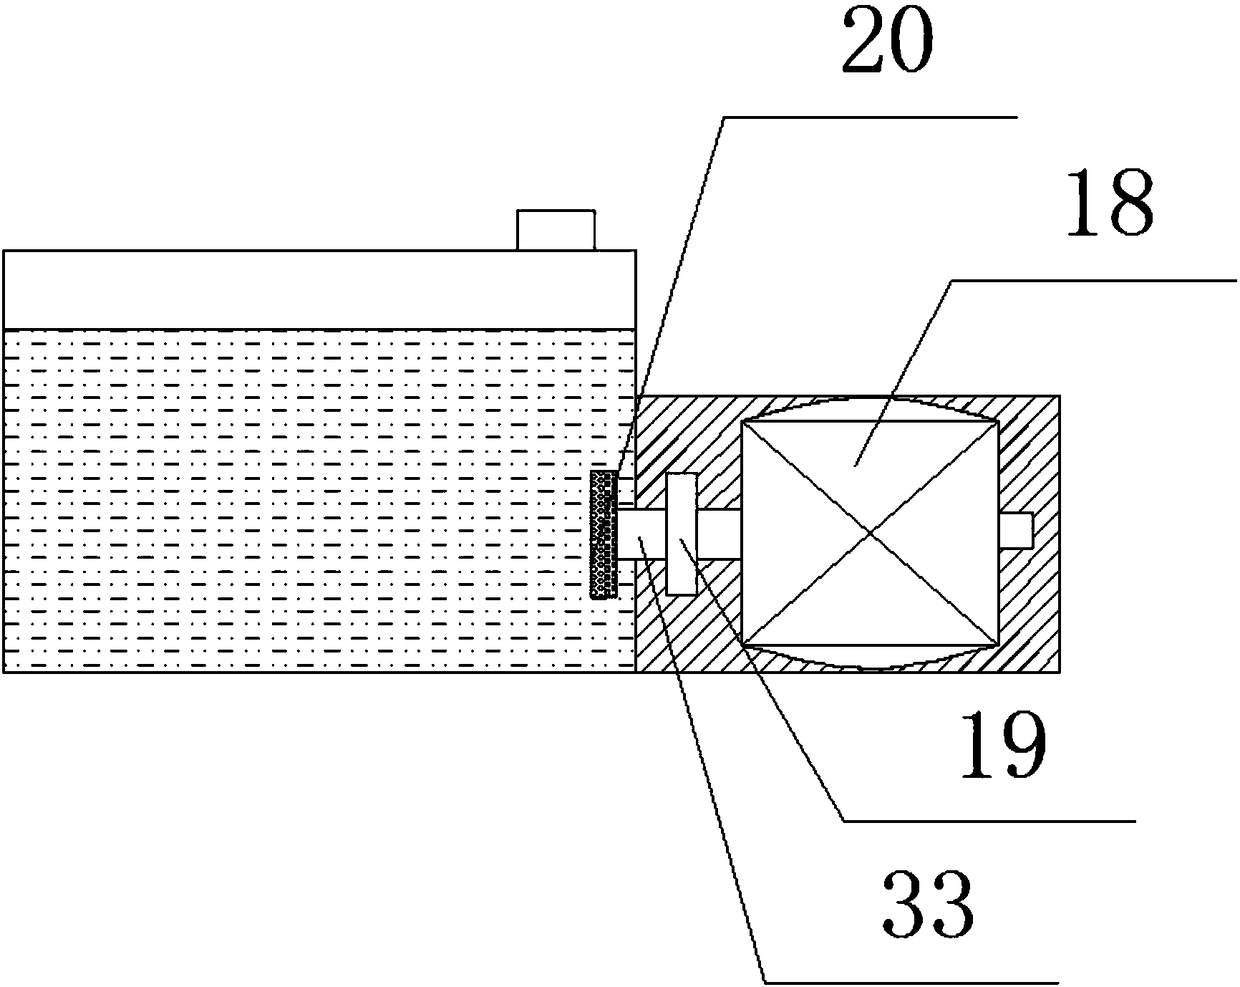 Indoor agricultural spraying system with agricultural microbubble device